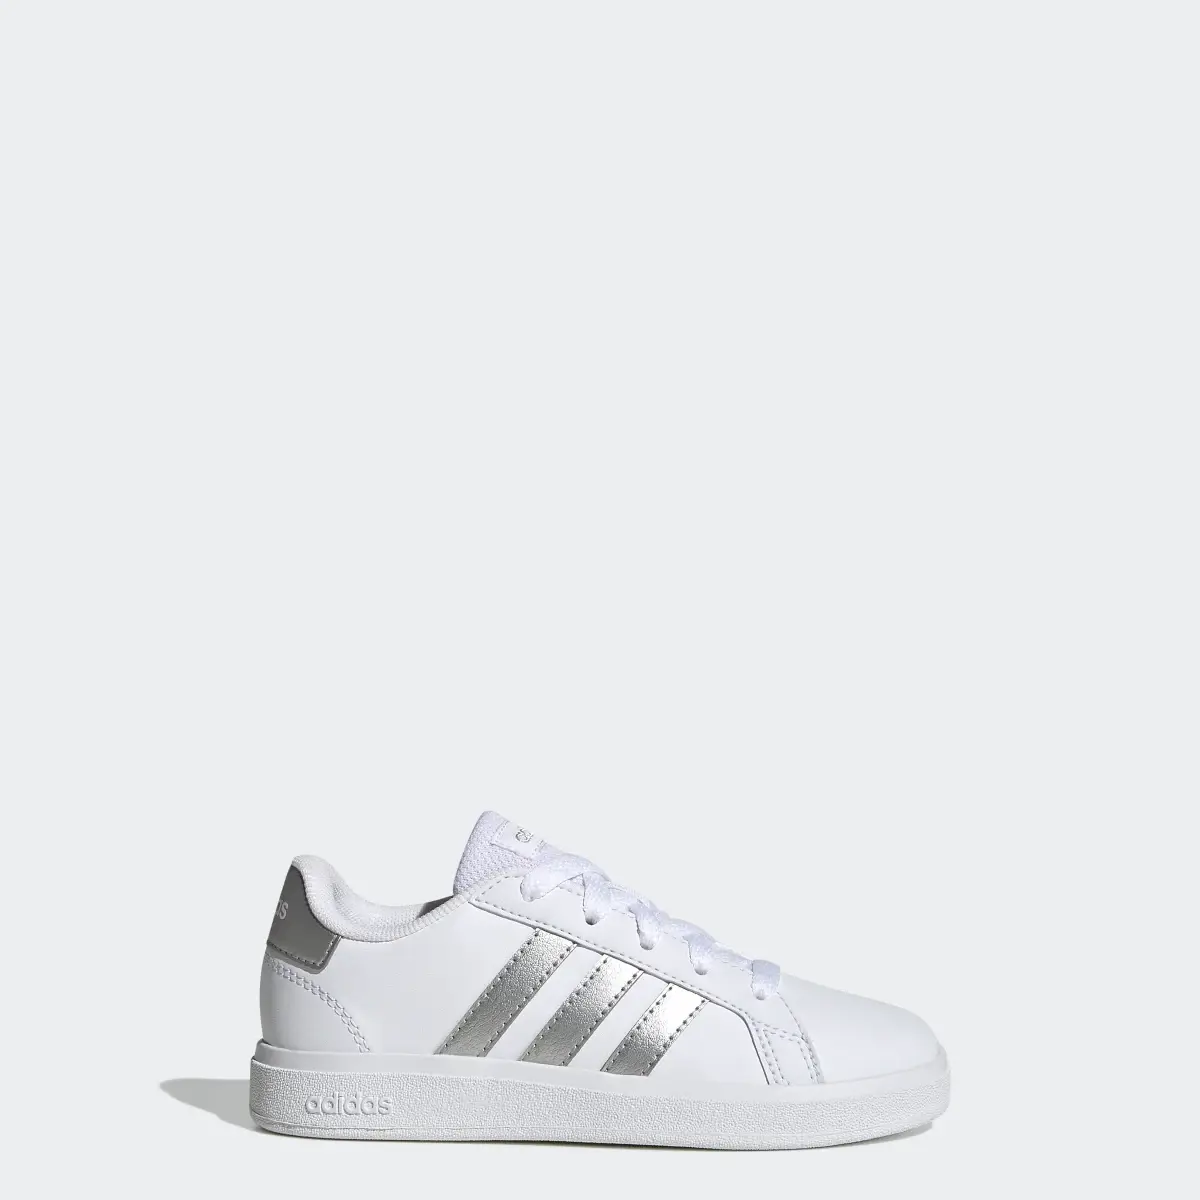 Adidas Grand Court Lifestyle Tennis Lace-Up Shoes. 1